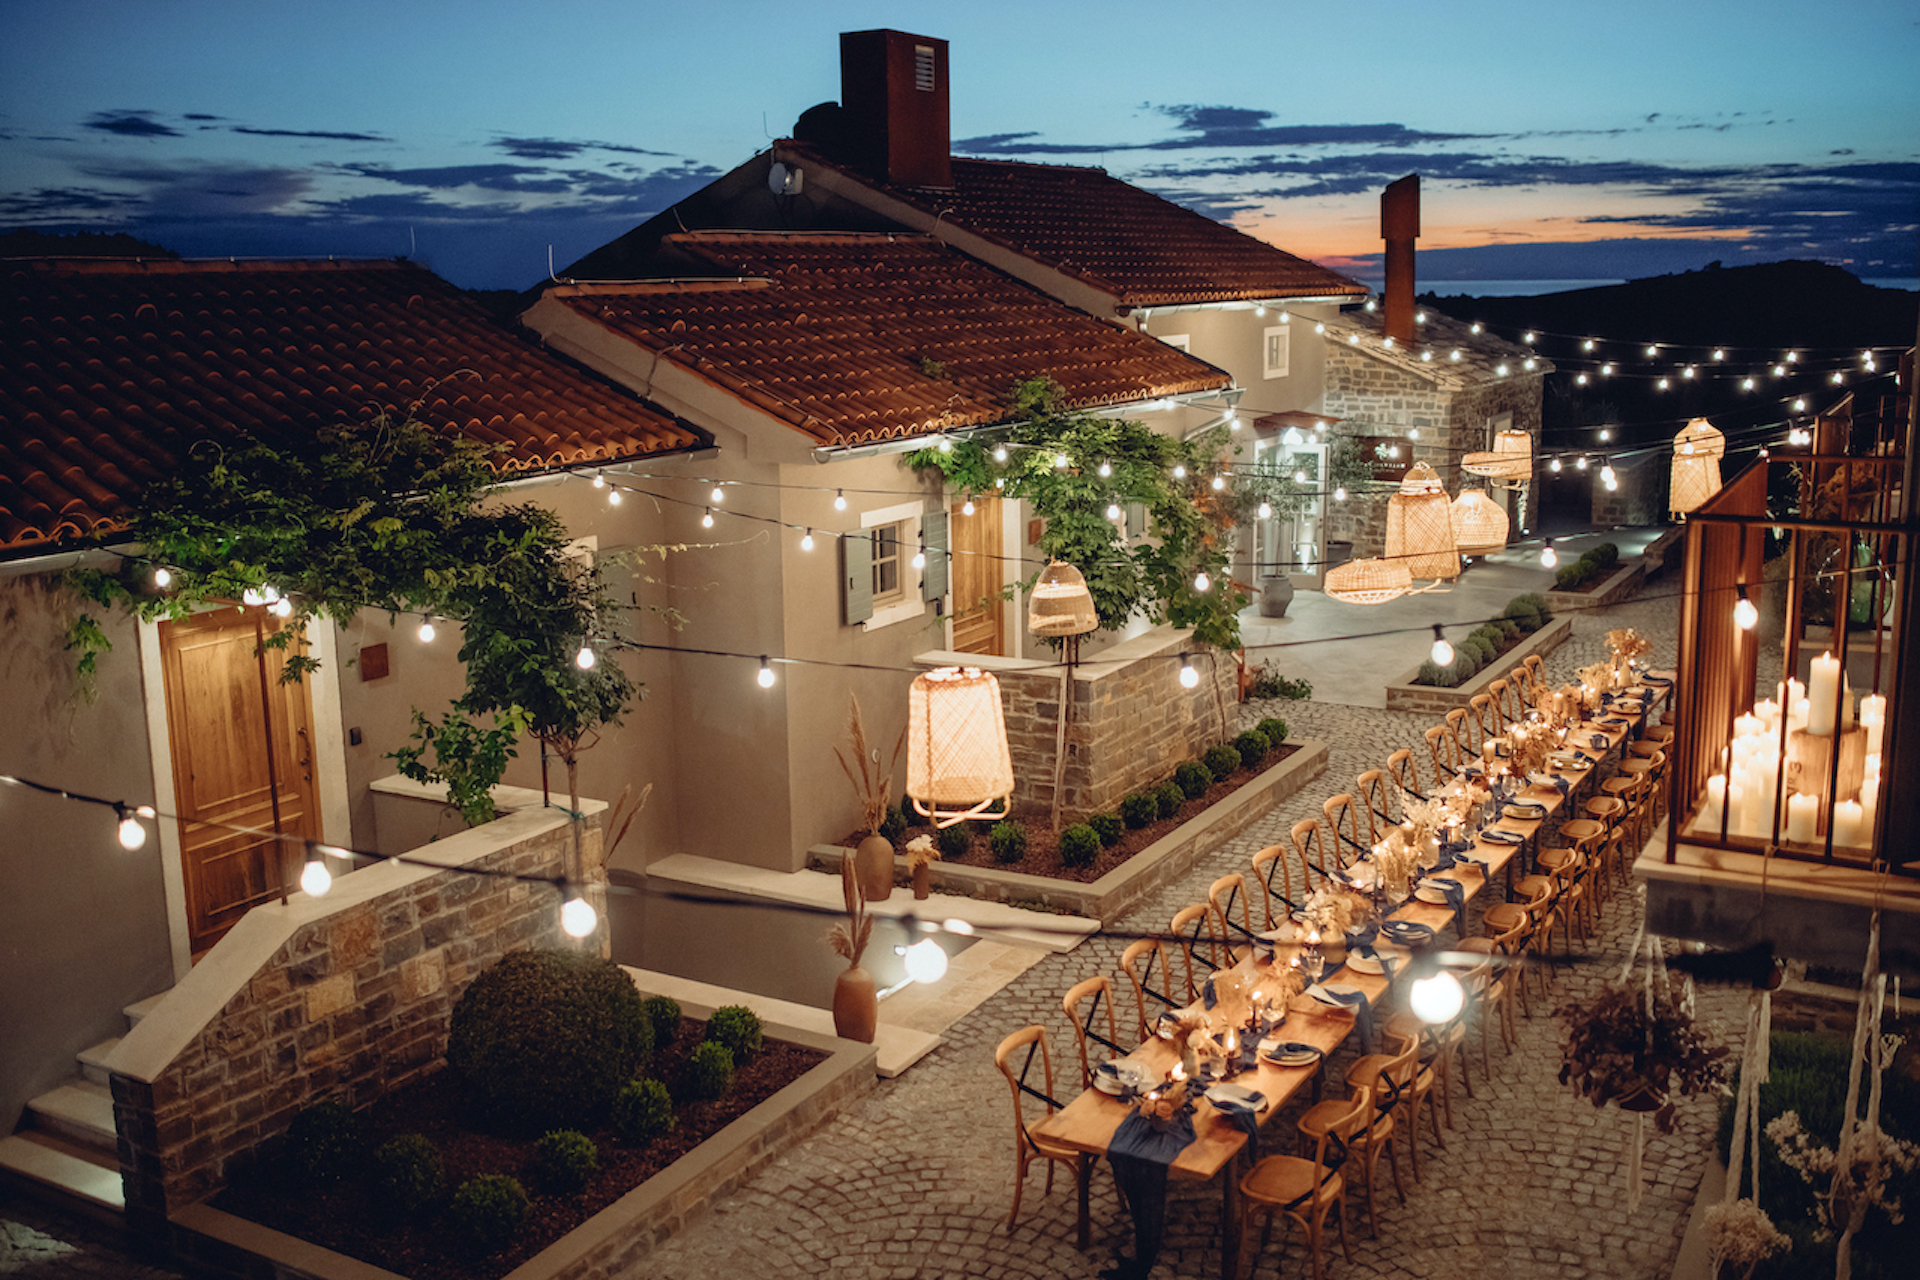 A charming European town in Croatia with a wedding set up in the street